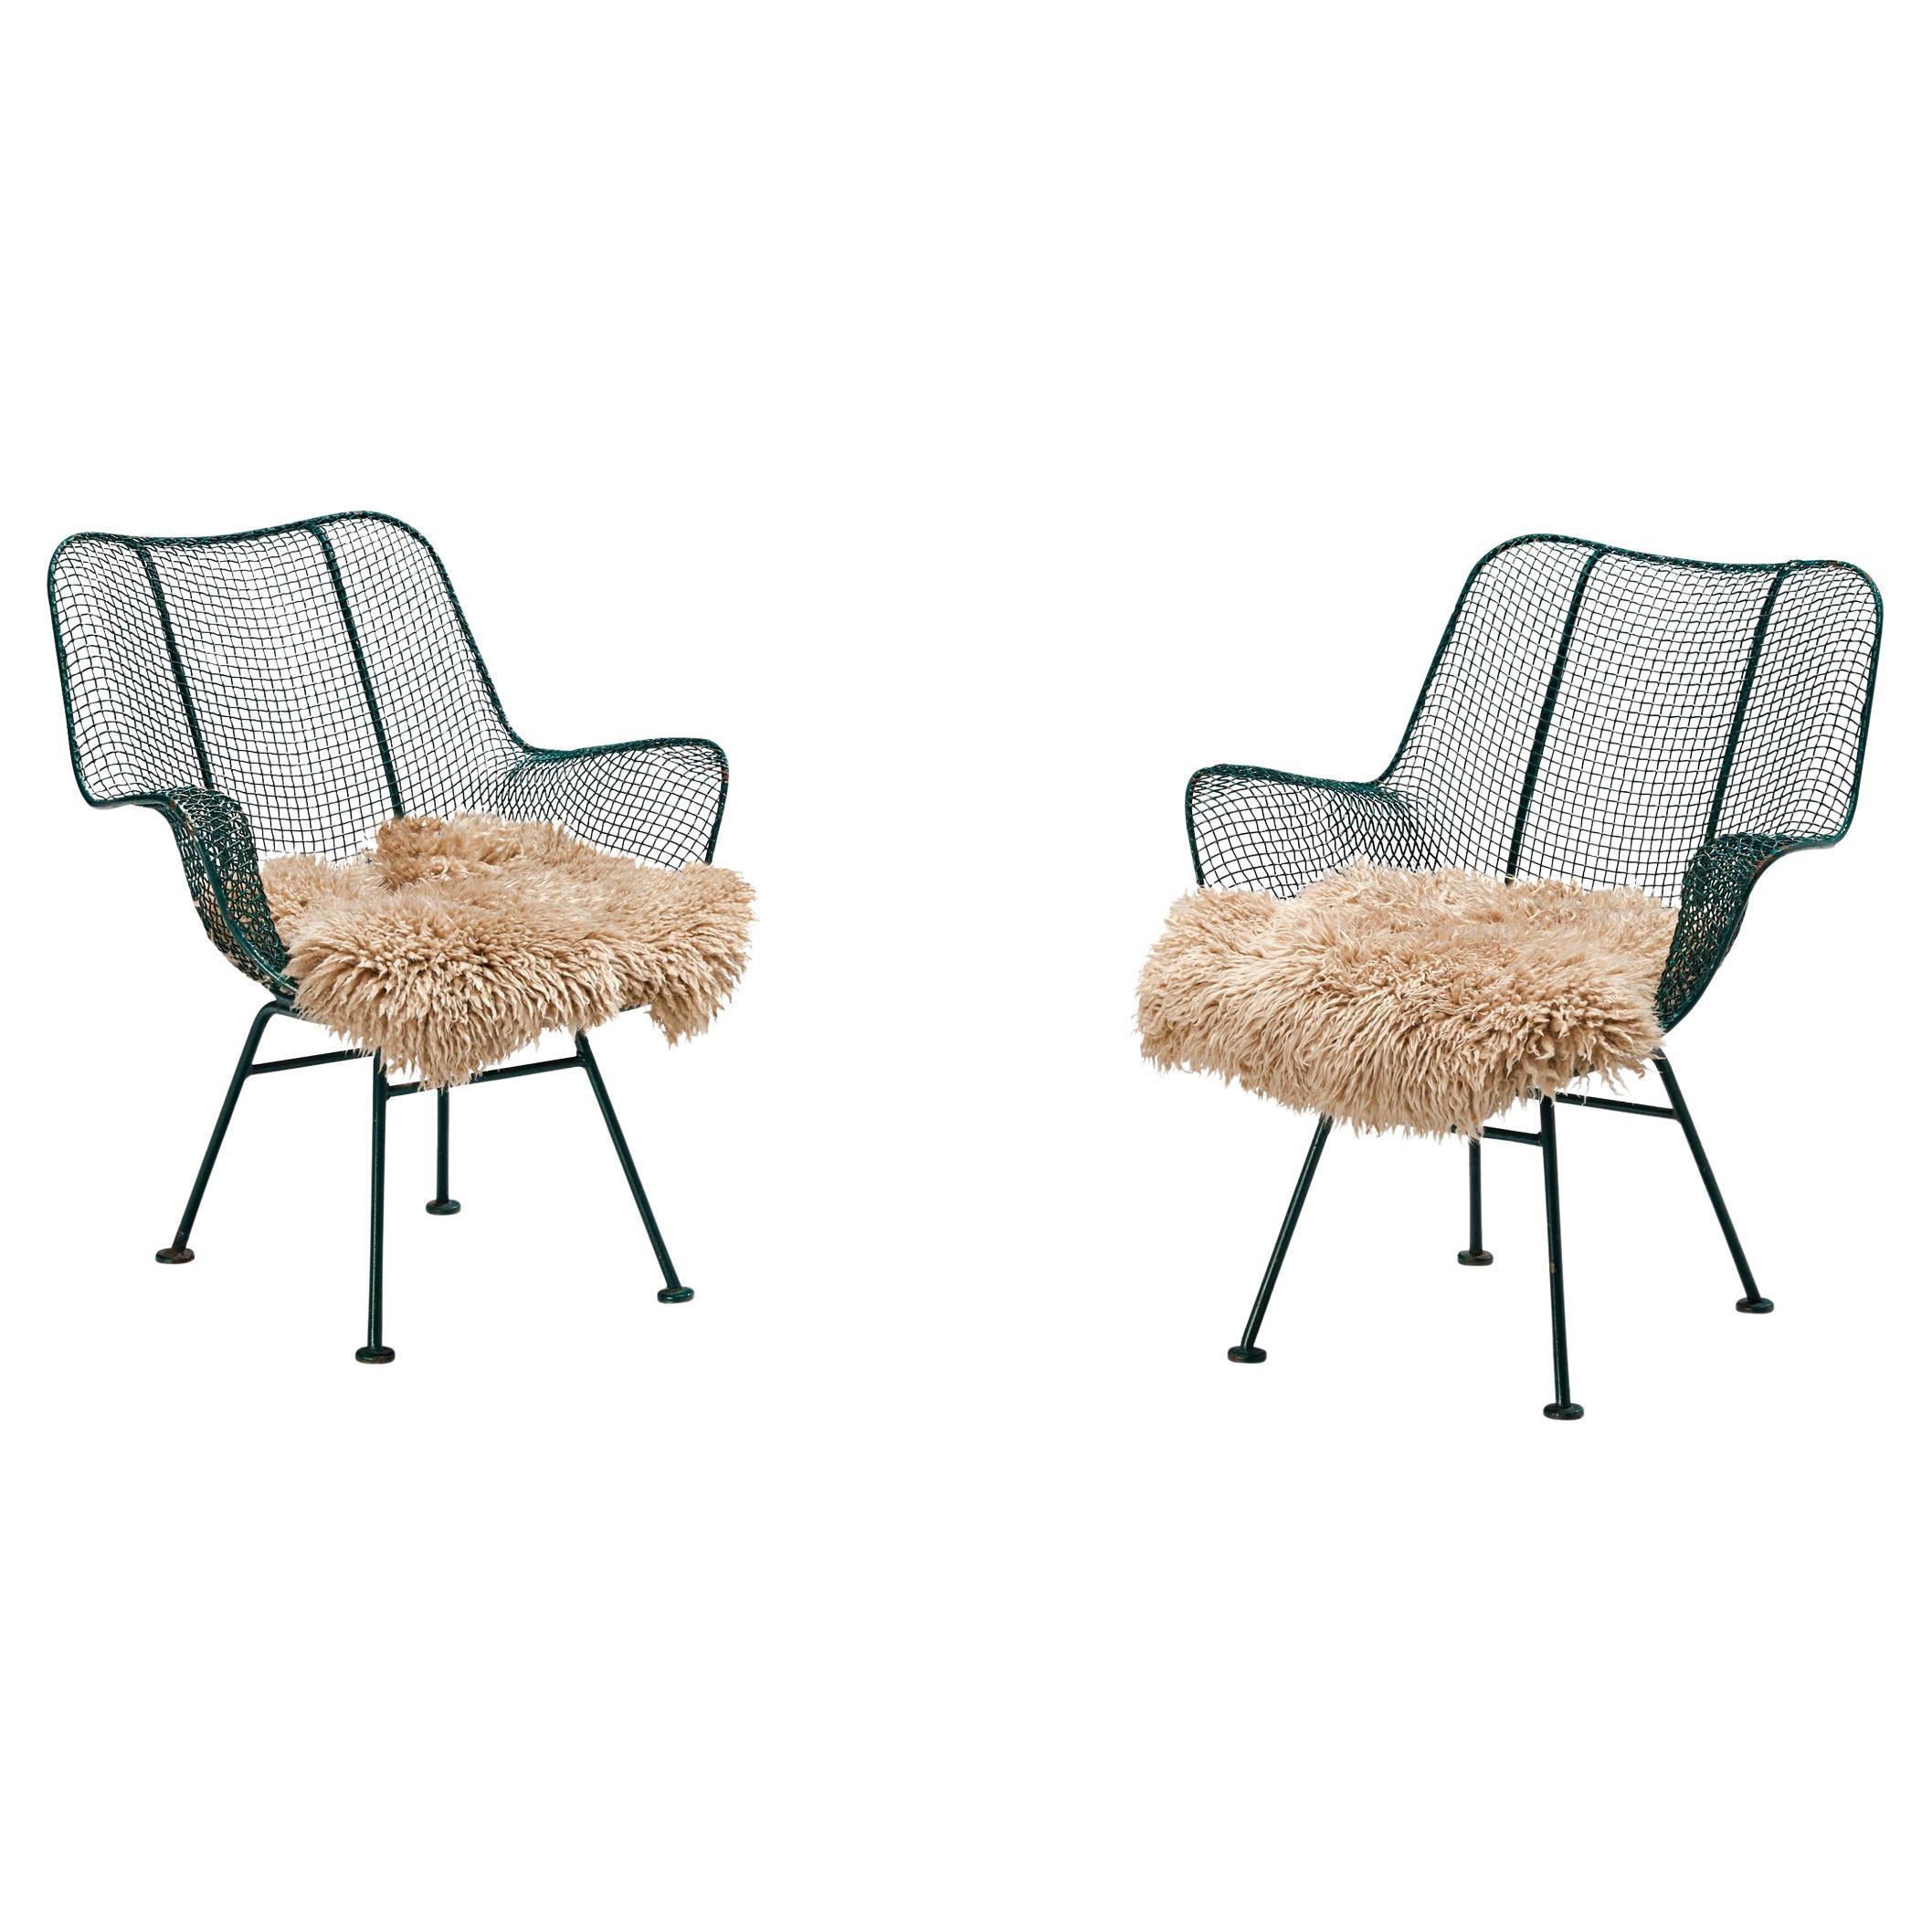 Russell Woodard 'Sculptura' Patio Chairs in Dark Green Lacquered Metal For Sale